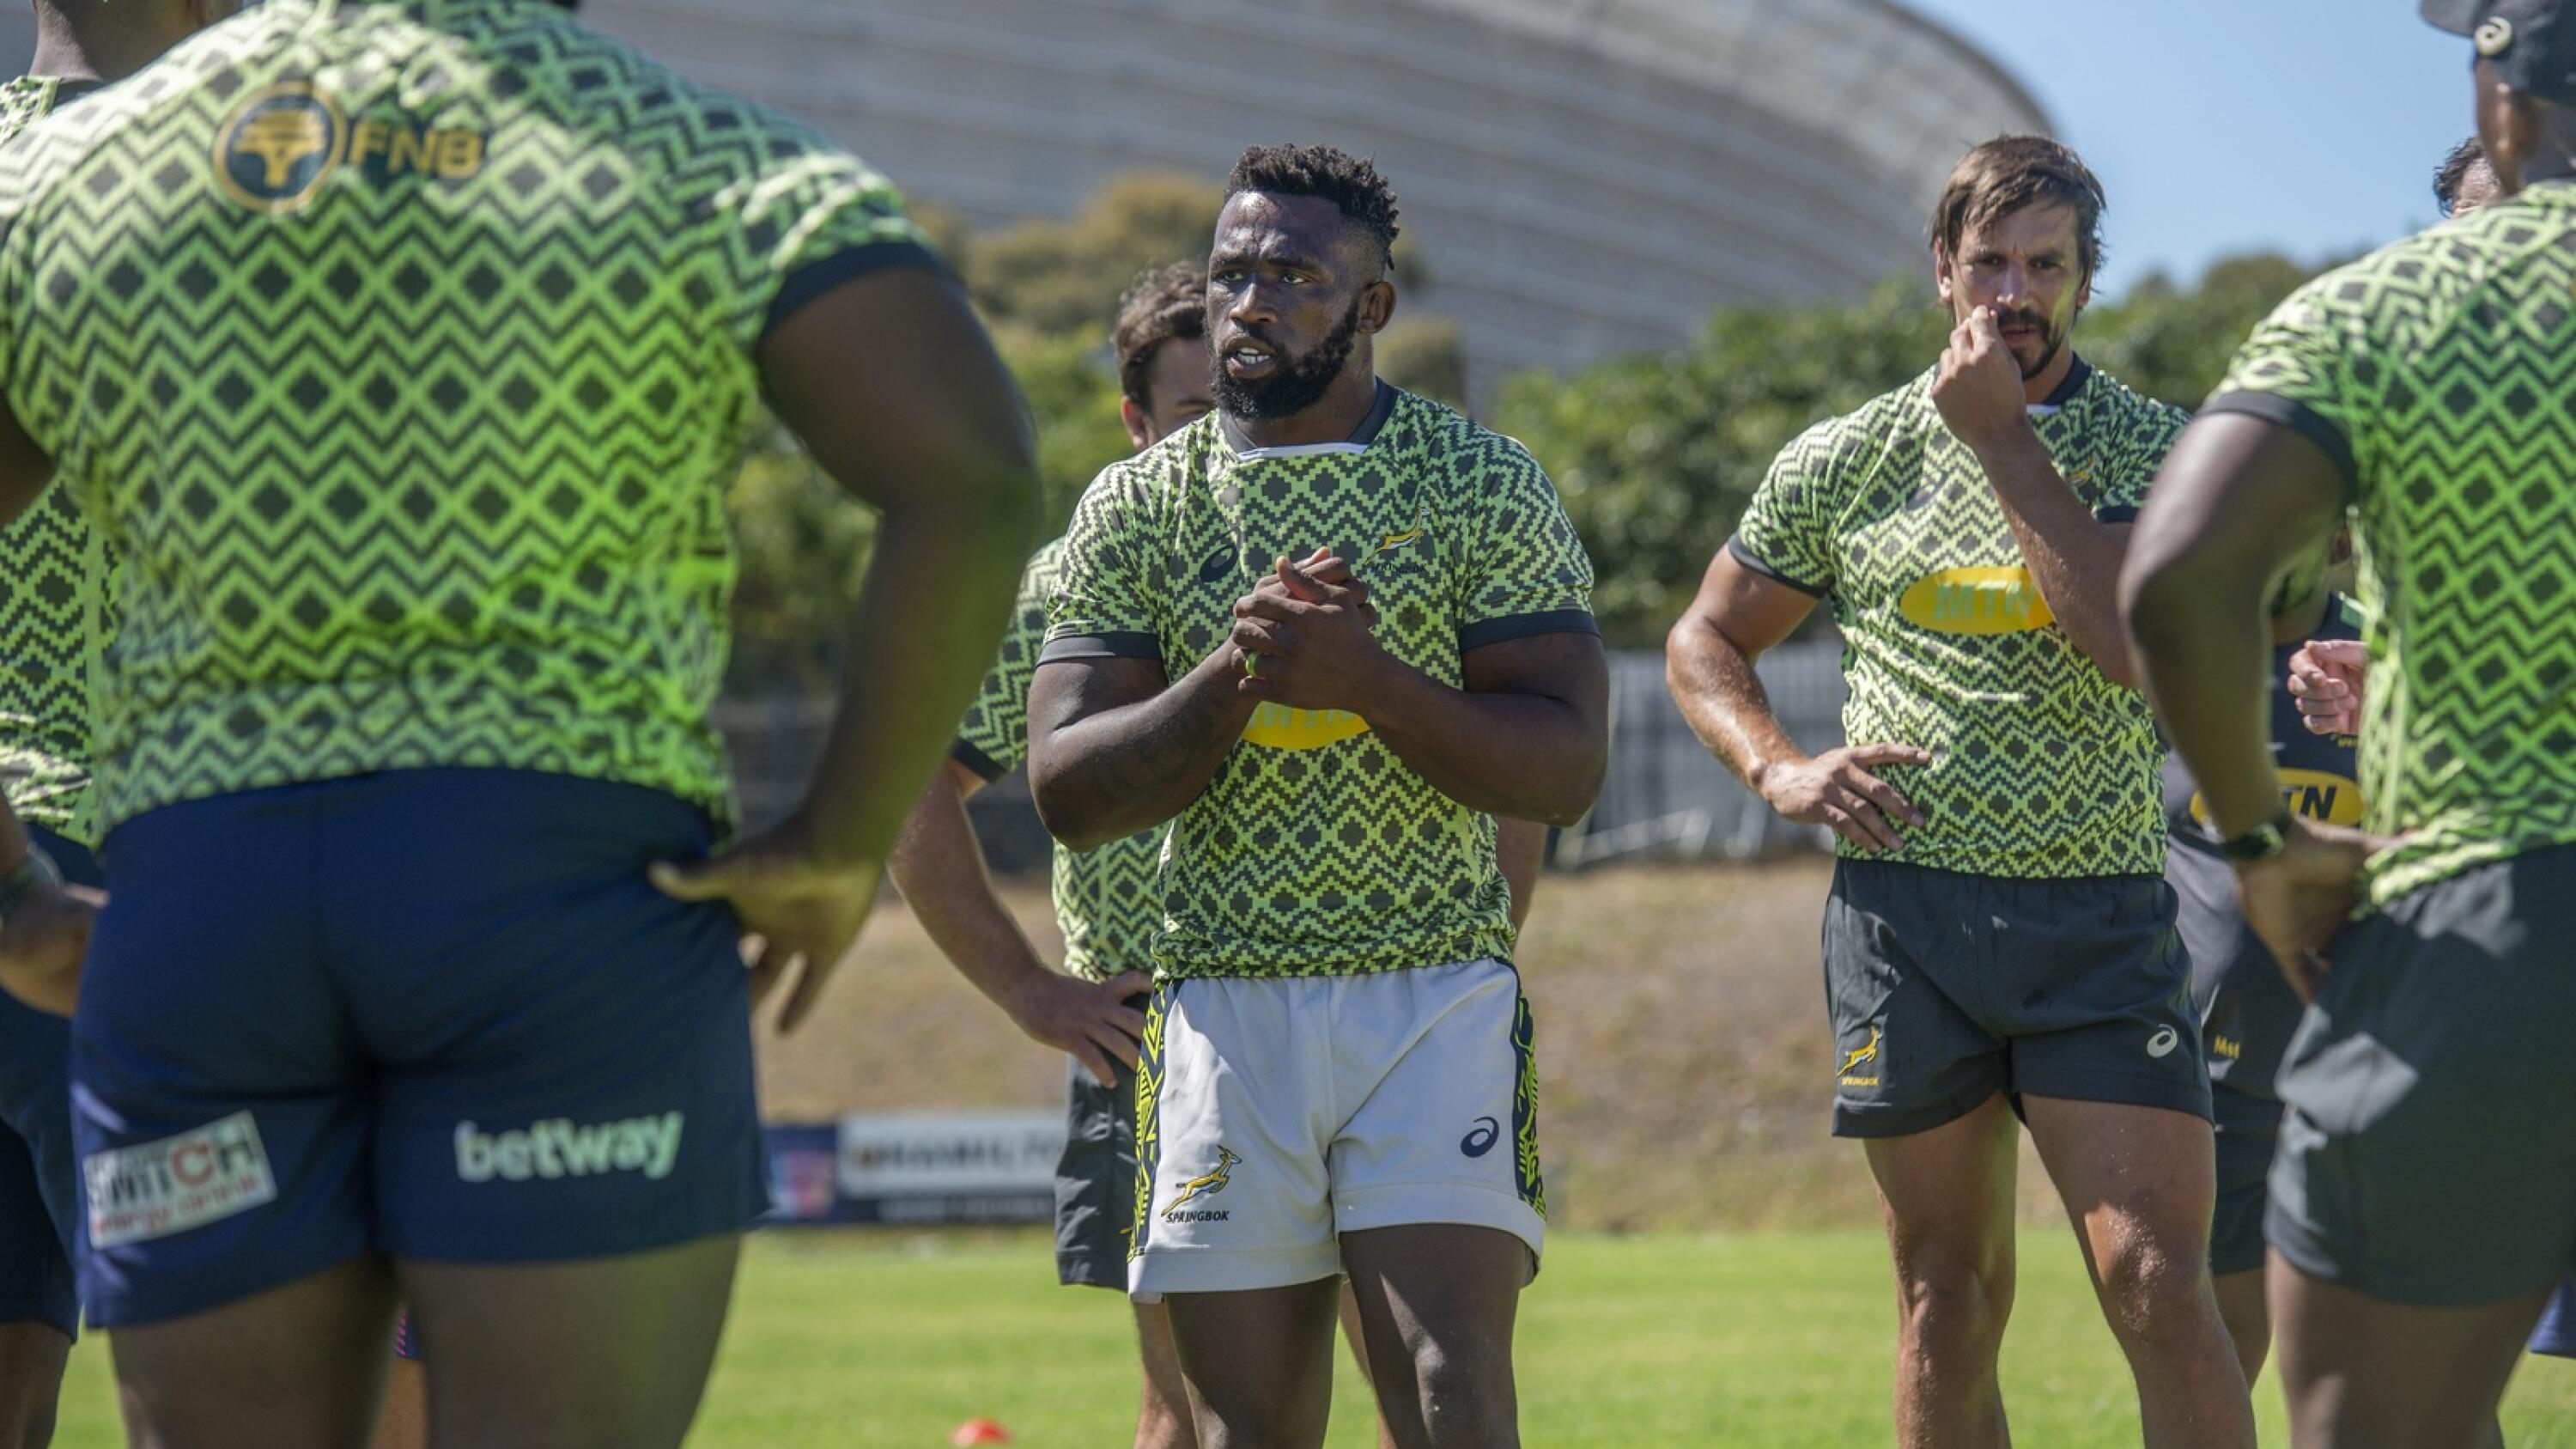 Springbok captain Siya Kolisi (centre) talks to his team during a training session, while Eben Etzebeth (right) looks on with the rest of the players.